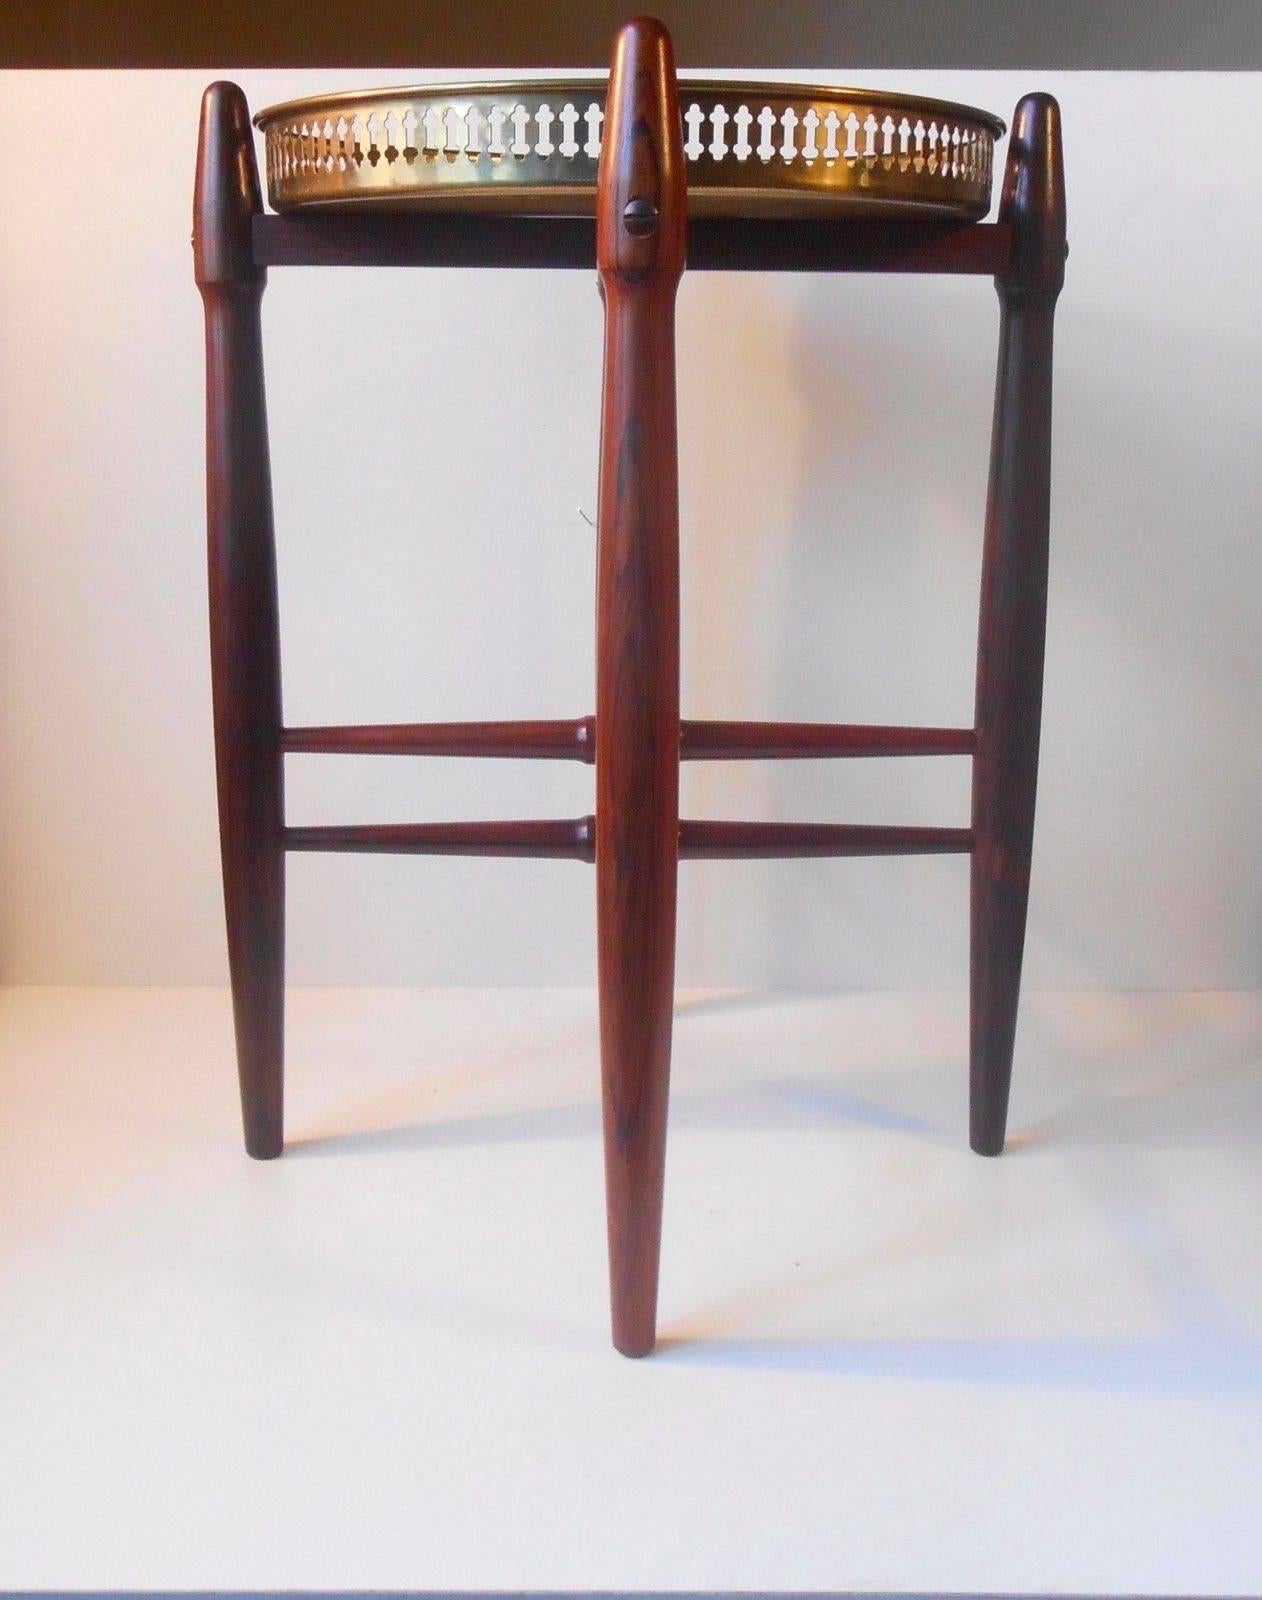 1960s Rosewood Side Brass Tray Table, Danish Modern by Poul Hundevad 2